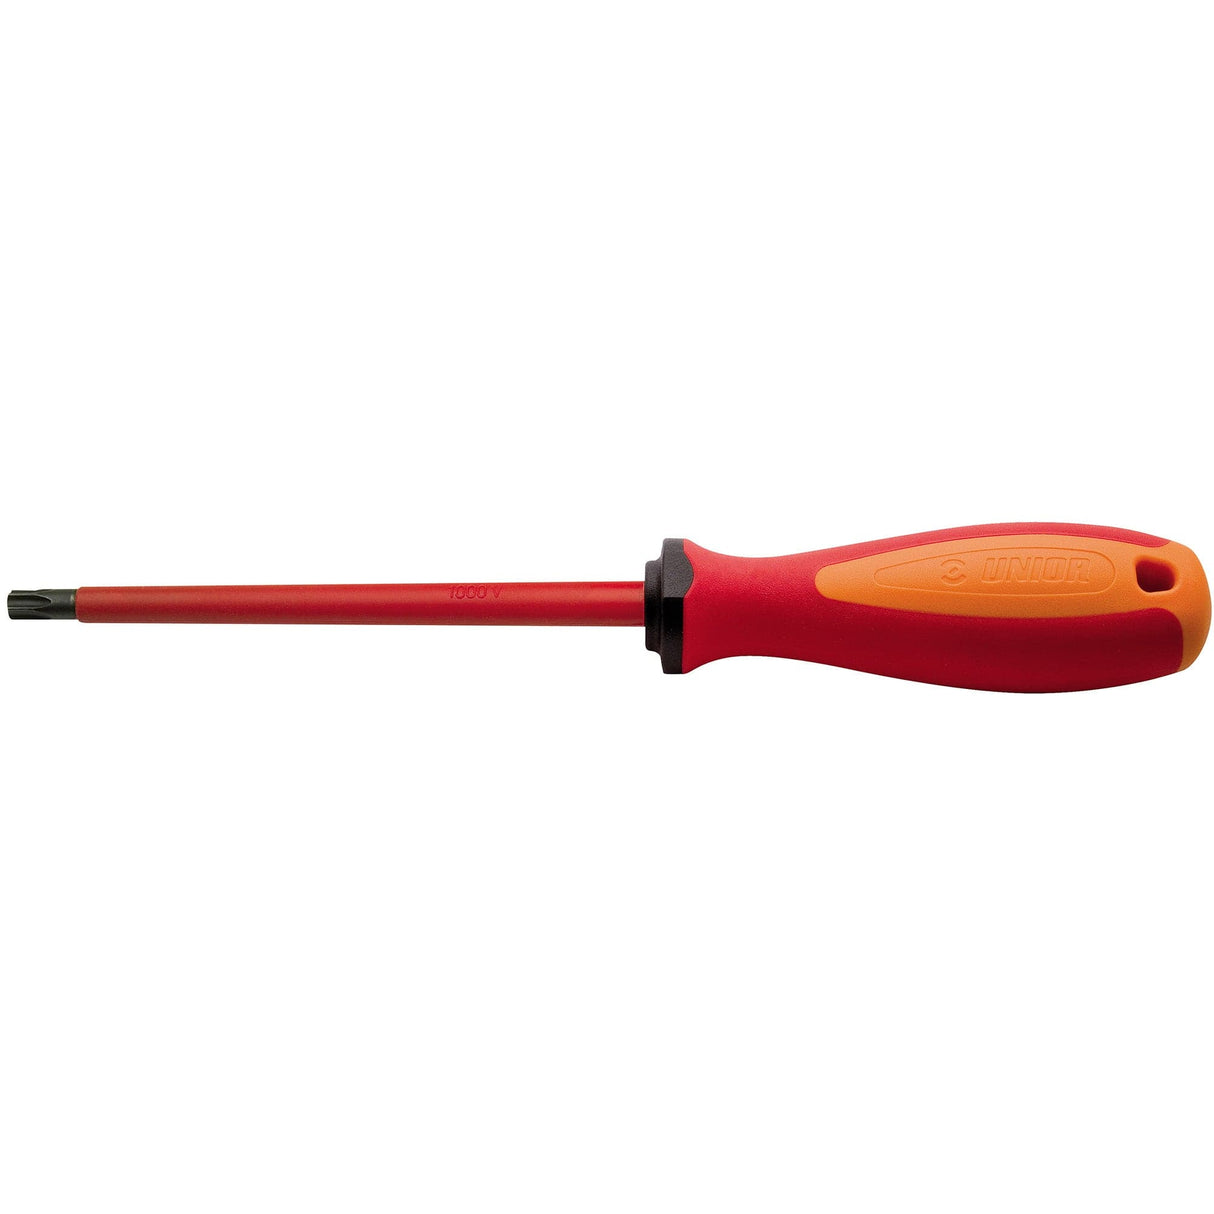 Unior Screwdriver Tbi With Tx Profile And Hole: Red Tr 15